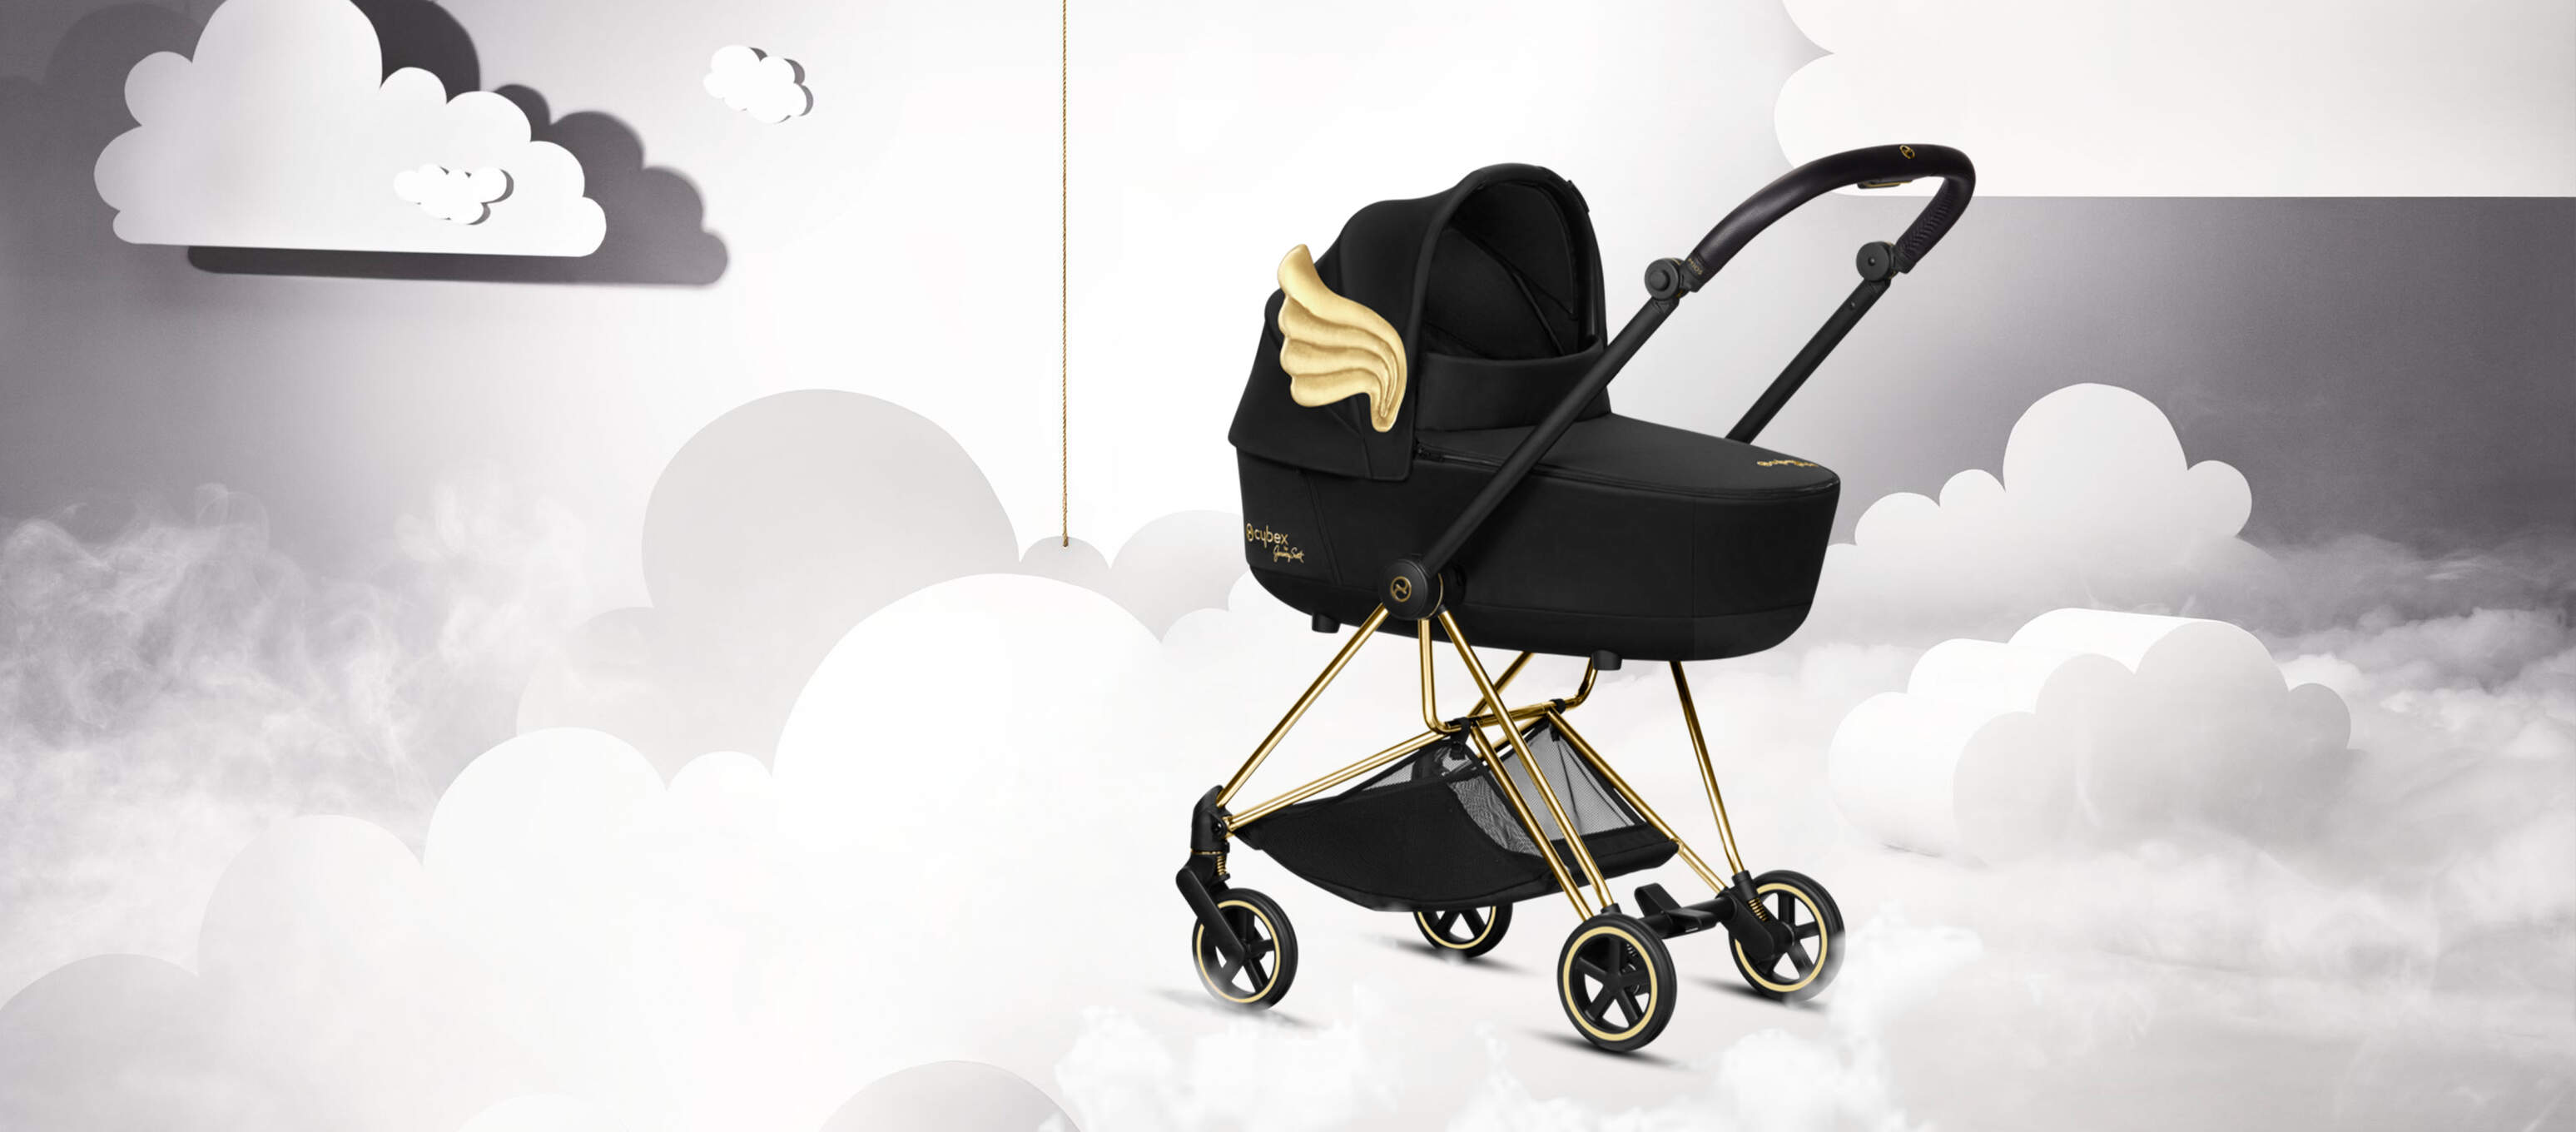 Cybex by Jeremy Scott Wings Collection Cloud and Pushchair Image